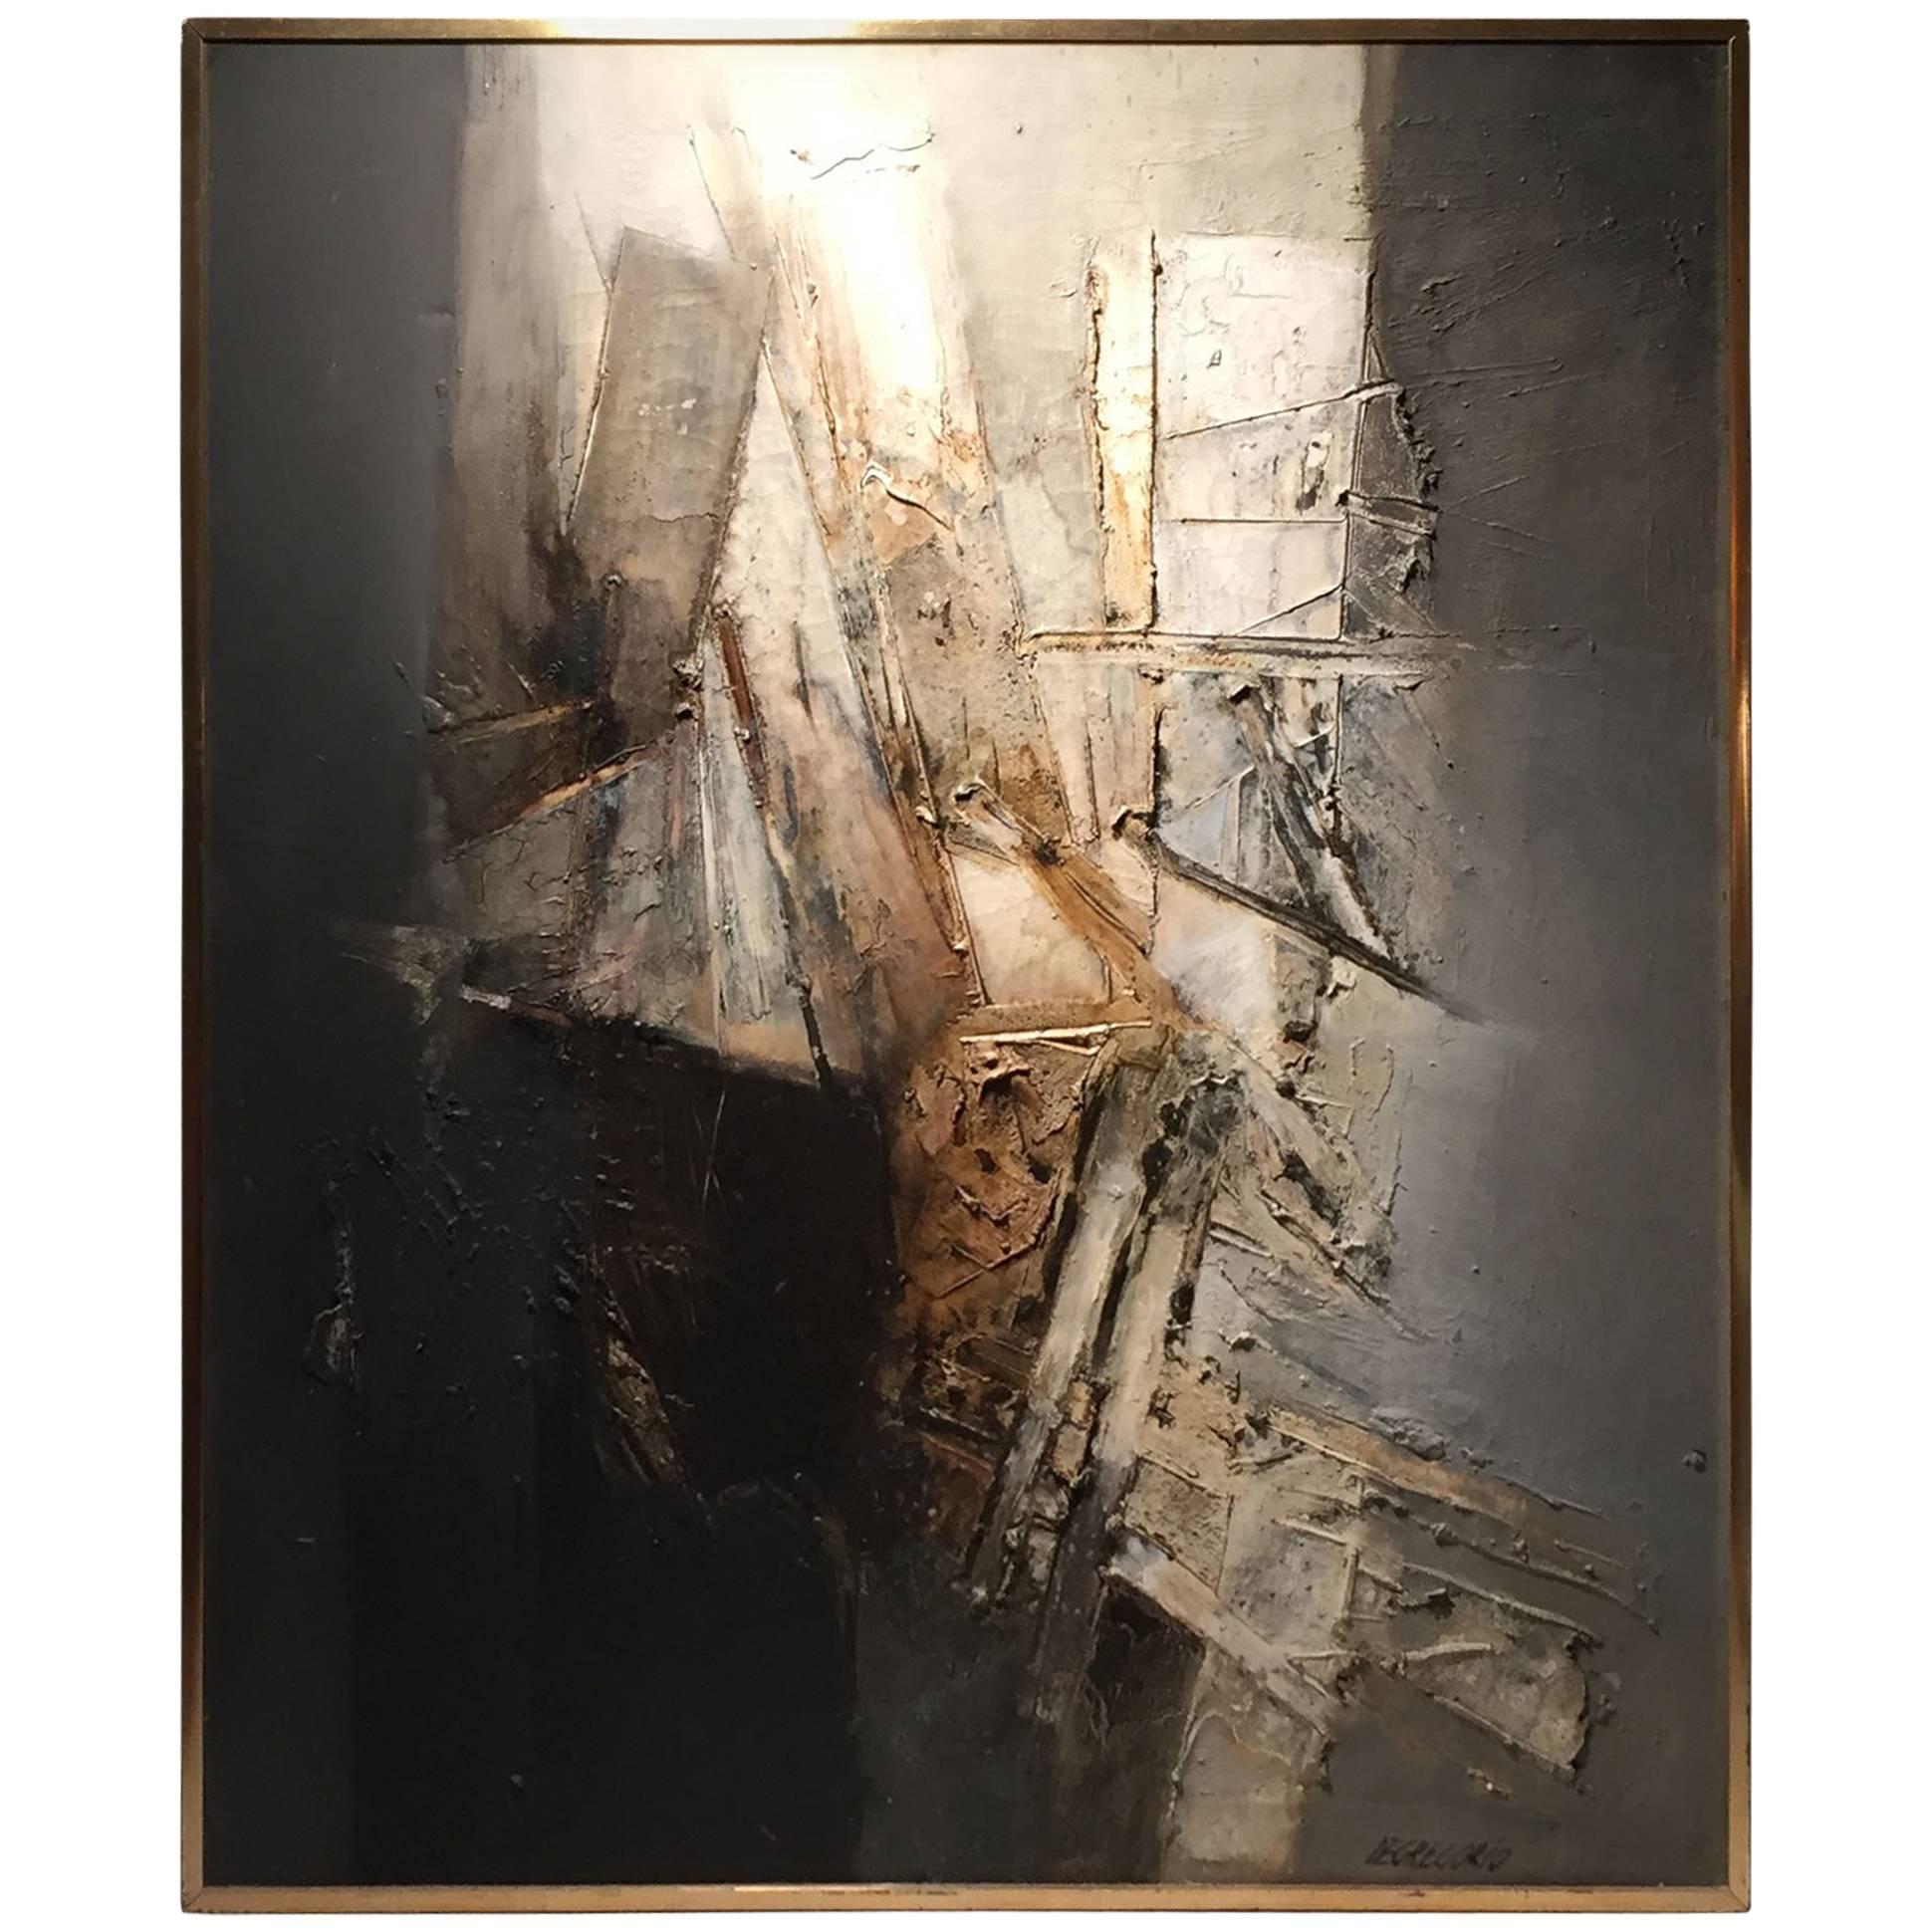 Italian Modern Abstract Expressionist Painting by Giuseppe De Gregorio